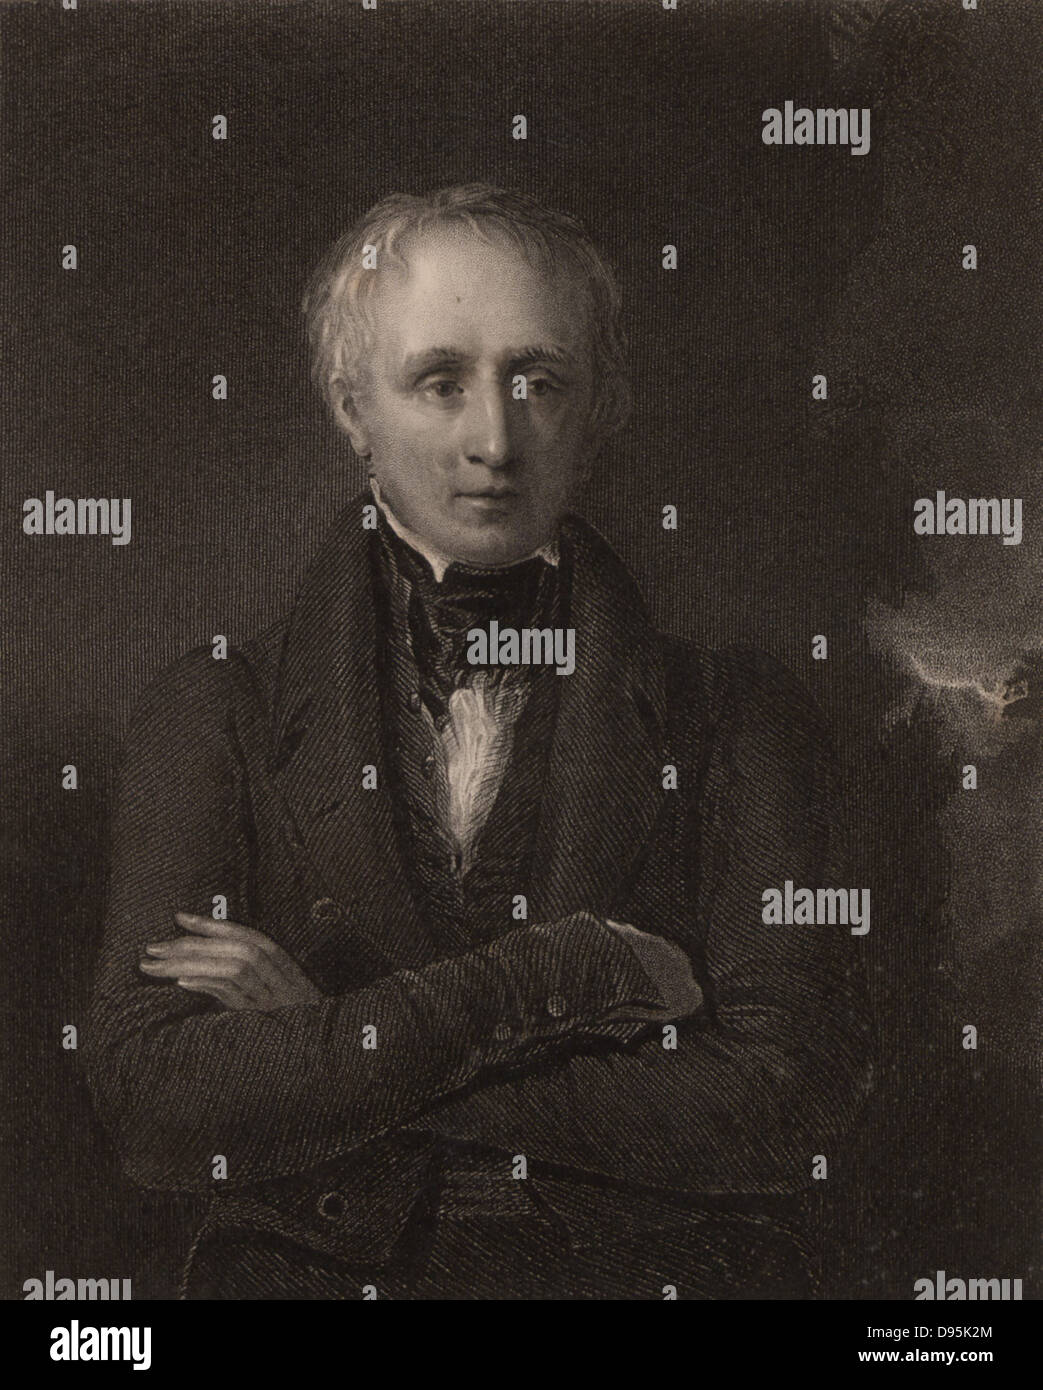 William Wordsworth (1770-1850) English poet born at Cockermouth, Cumbria. Succeeded Robert Southey as Poet Laureate in 1843. Engraving from 'National Portrait Gallery'  (London, 1833). Stock Photo